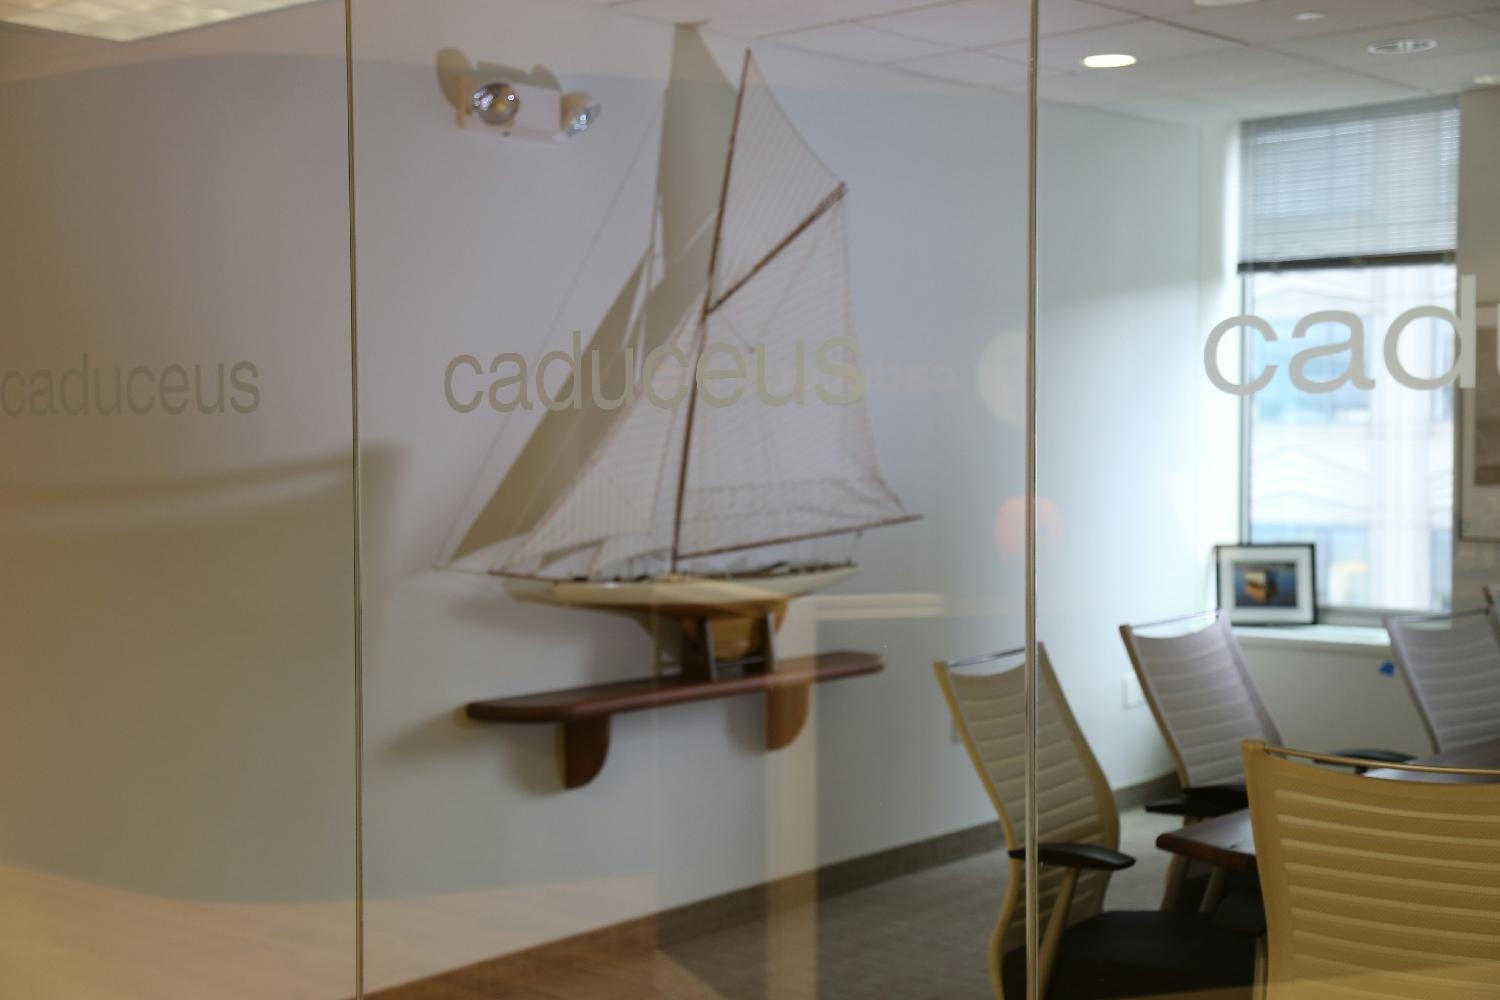 CaduceusHealth Conference Room